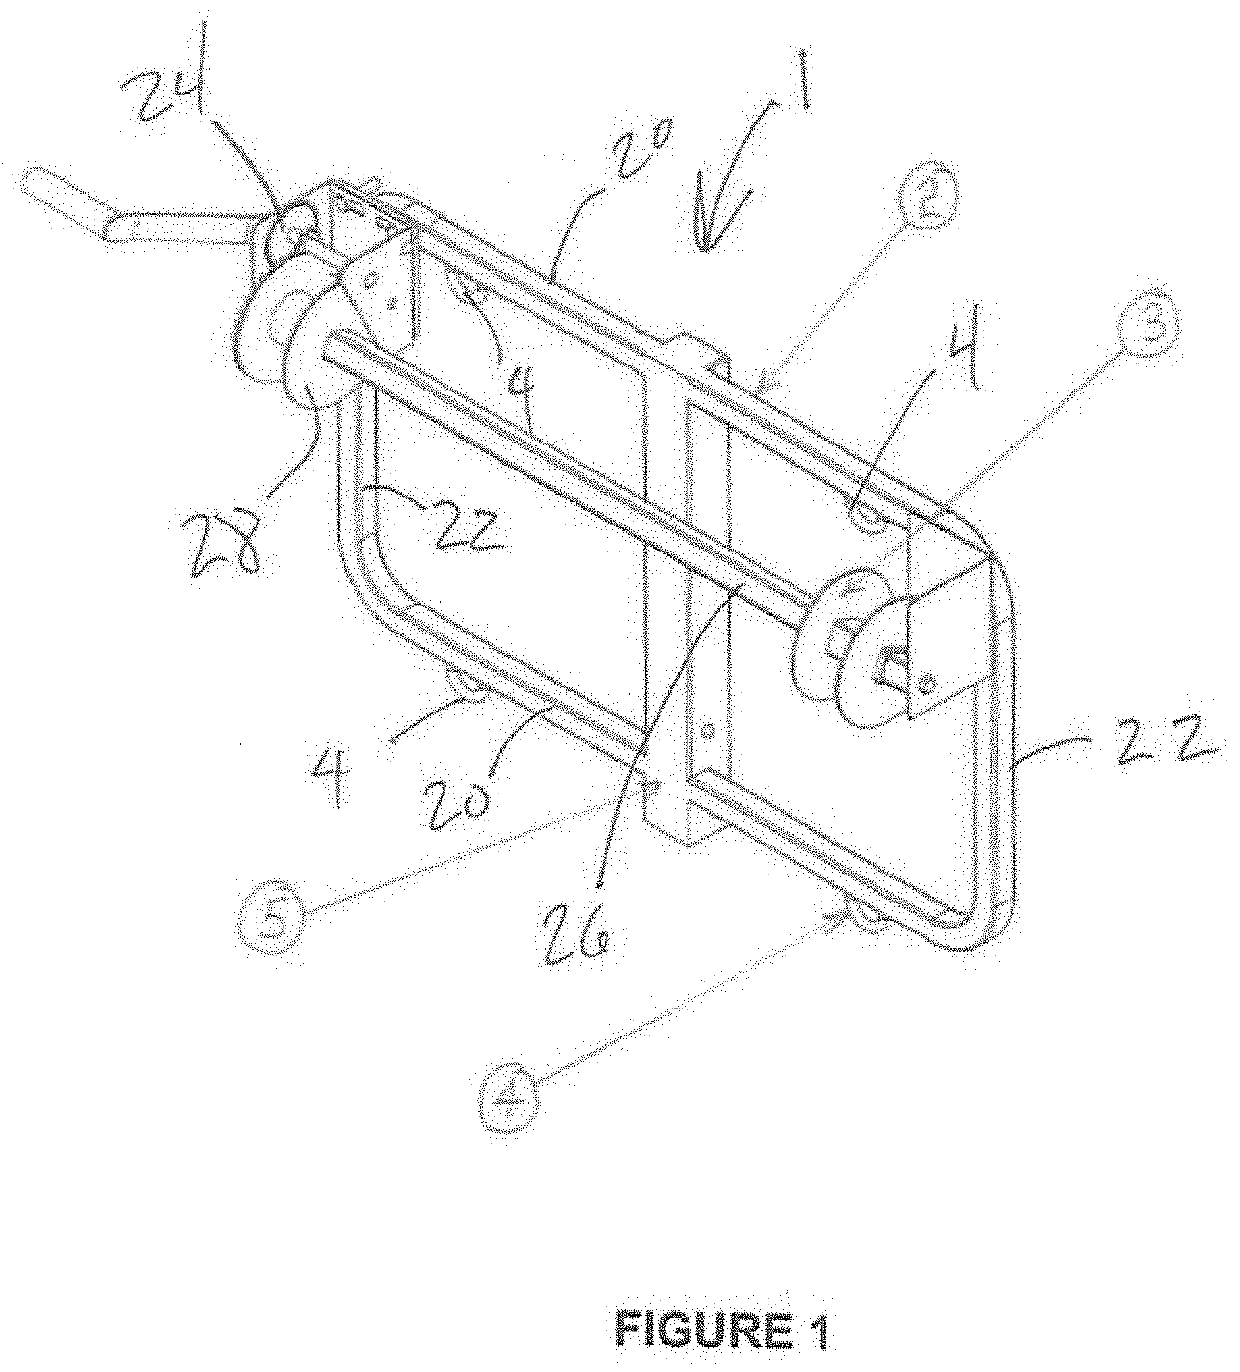 Device for Lifting and Transporting Large Game with a Vehicle or All-Terrain Vehicle